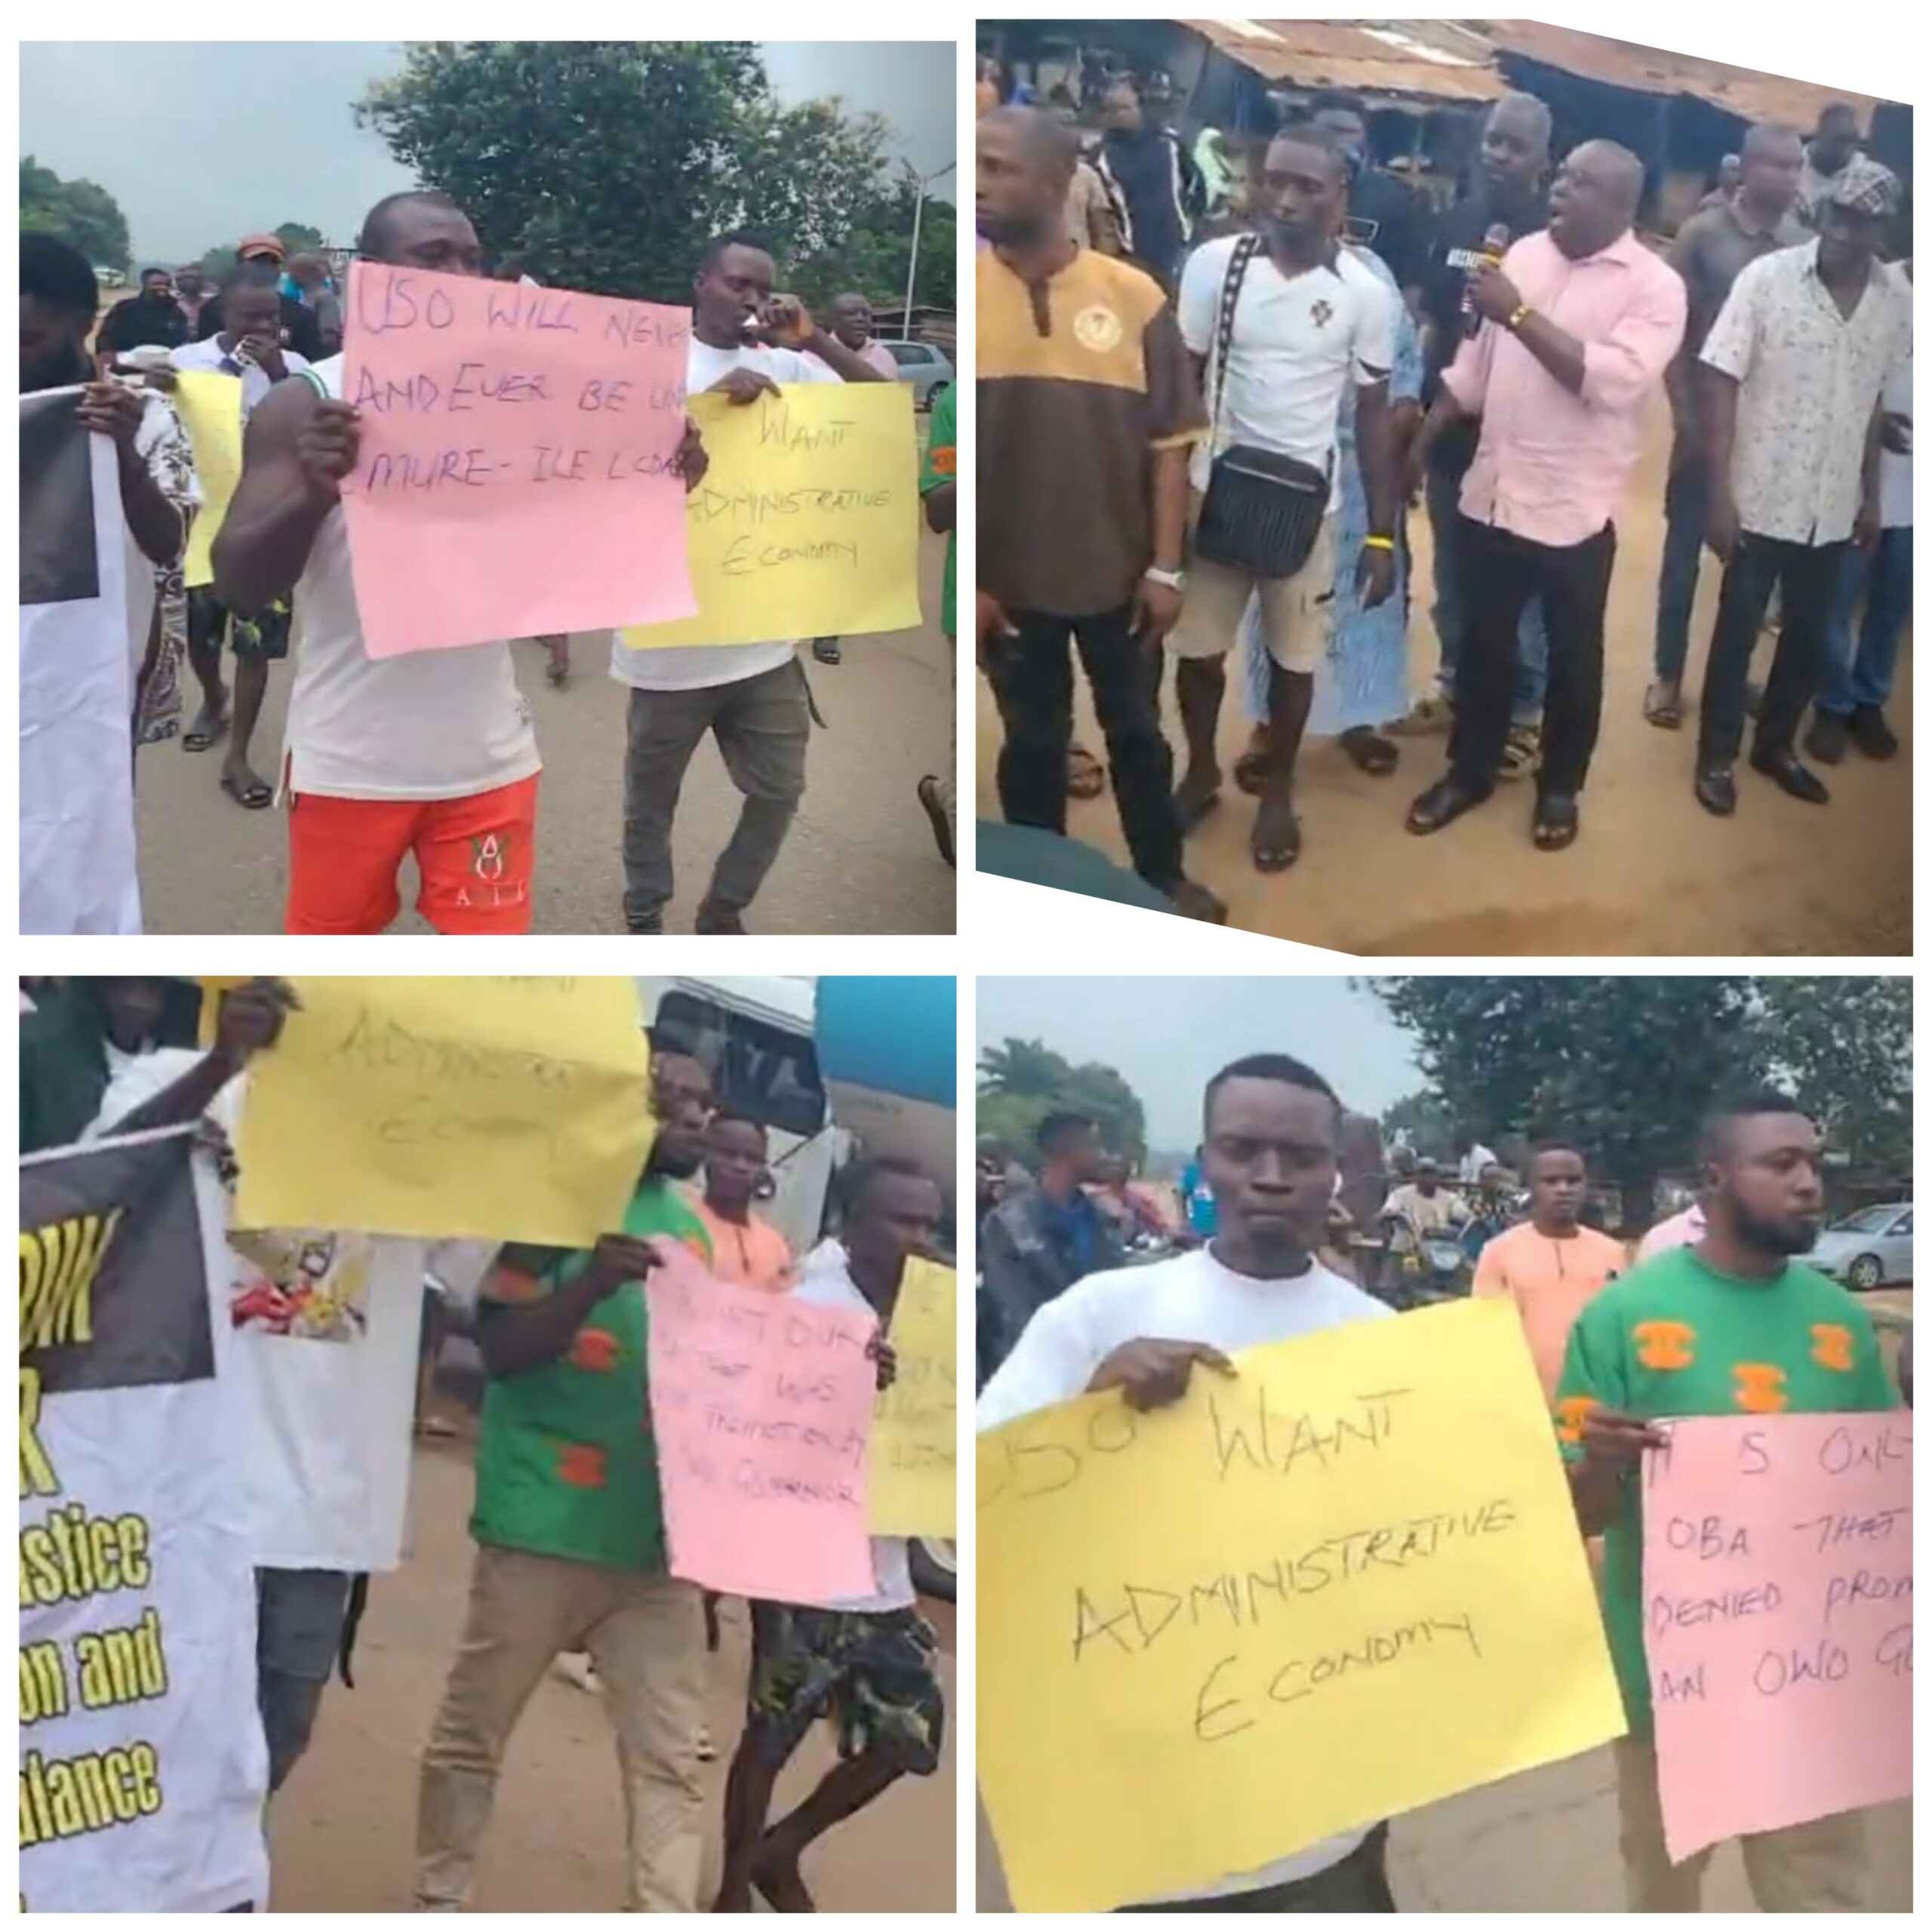 Again, Uso Youths Protest Inclusion in Owo North West LCDA, Demand to Remain Alone or Under Owo LGA